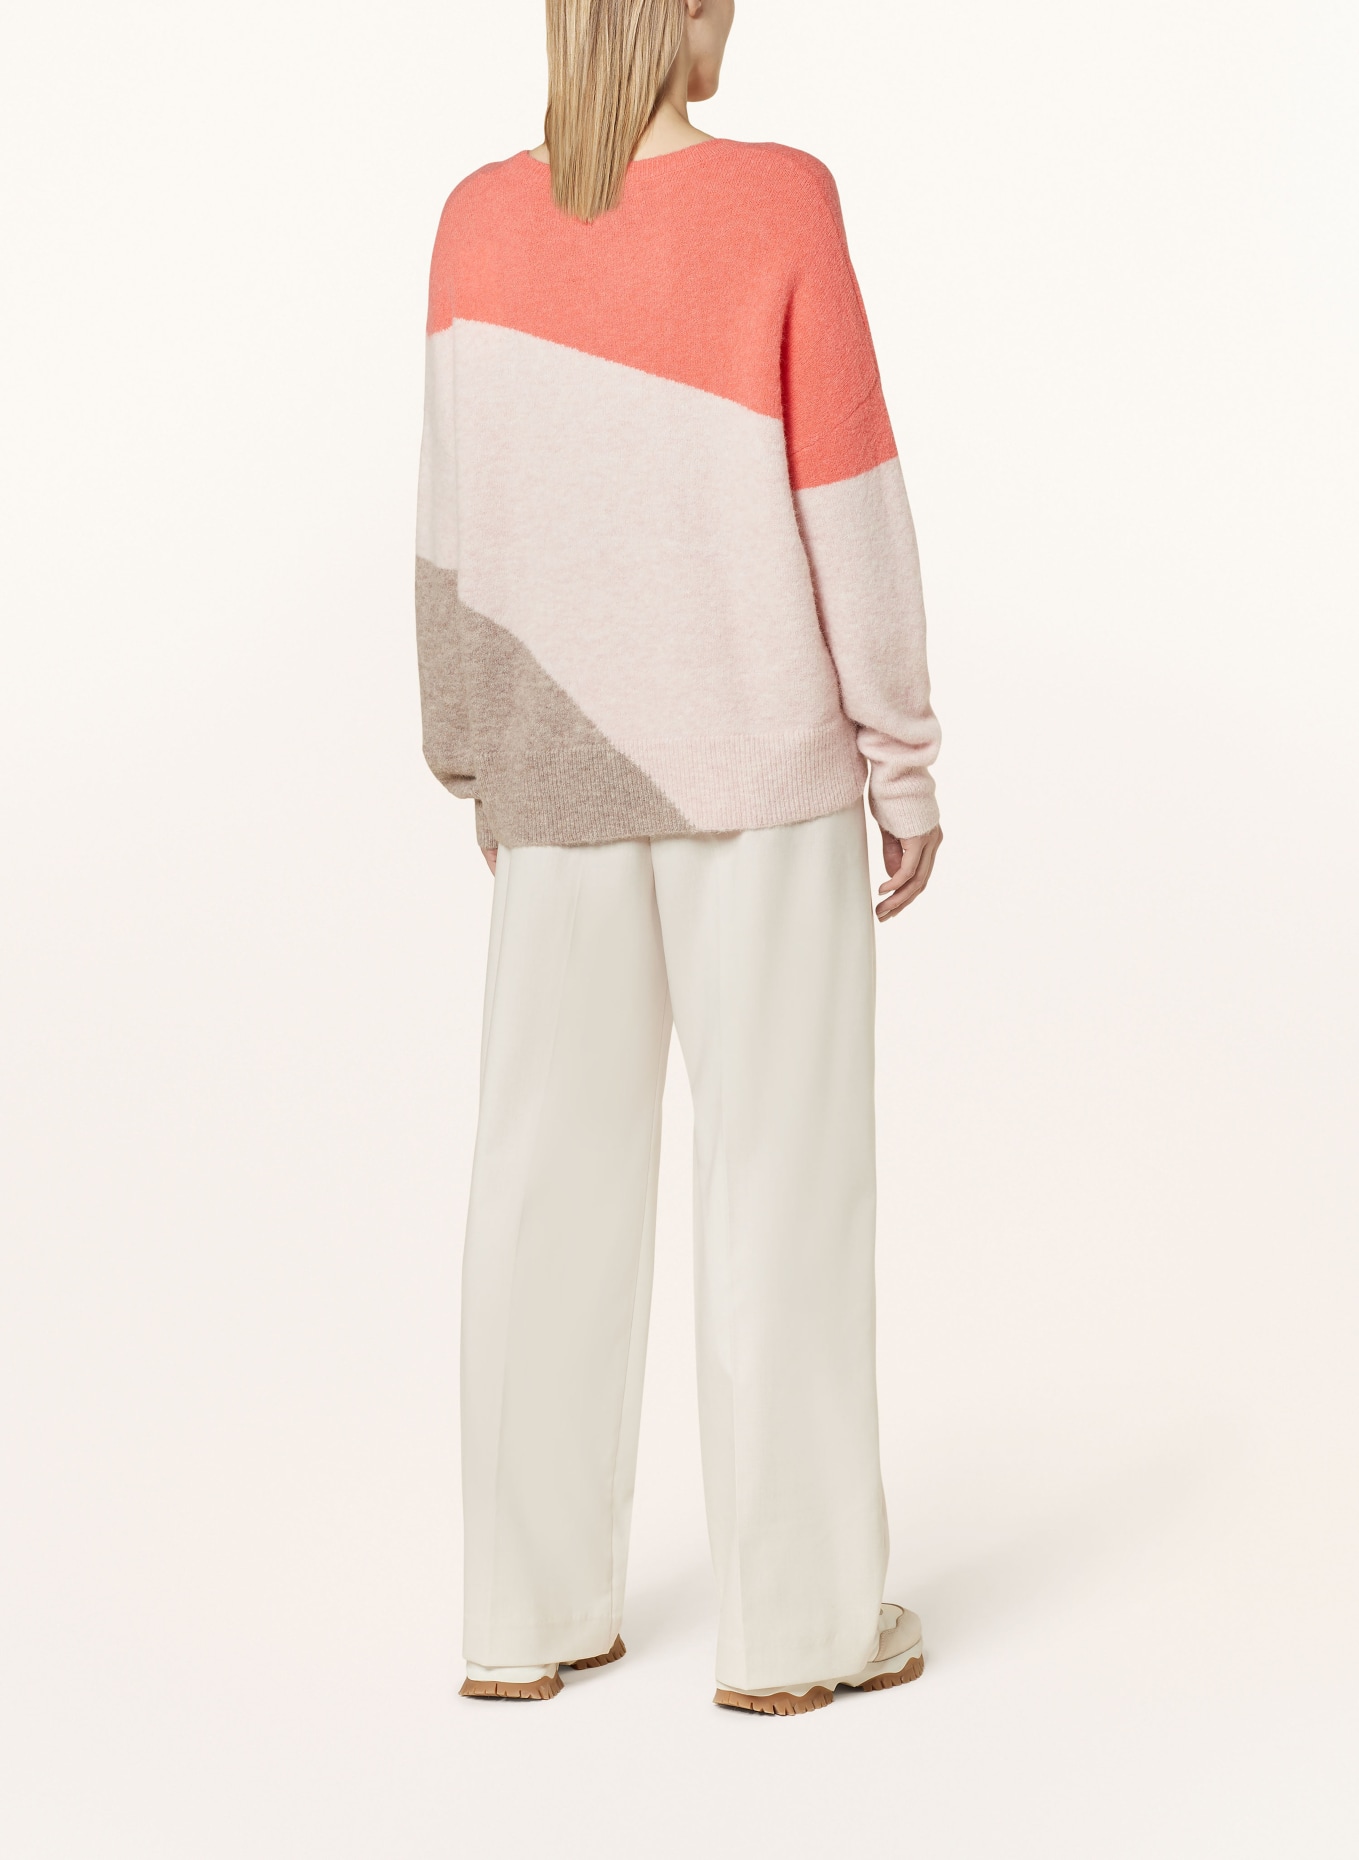 FYNCH-HATTON Sweater with alpaca, Color: LIGHT PINK/ LIGHT RED/ BEIGE (Image 3)